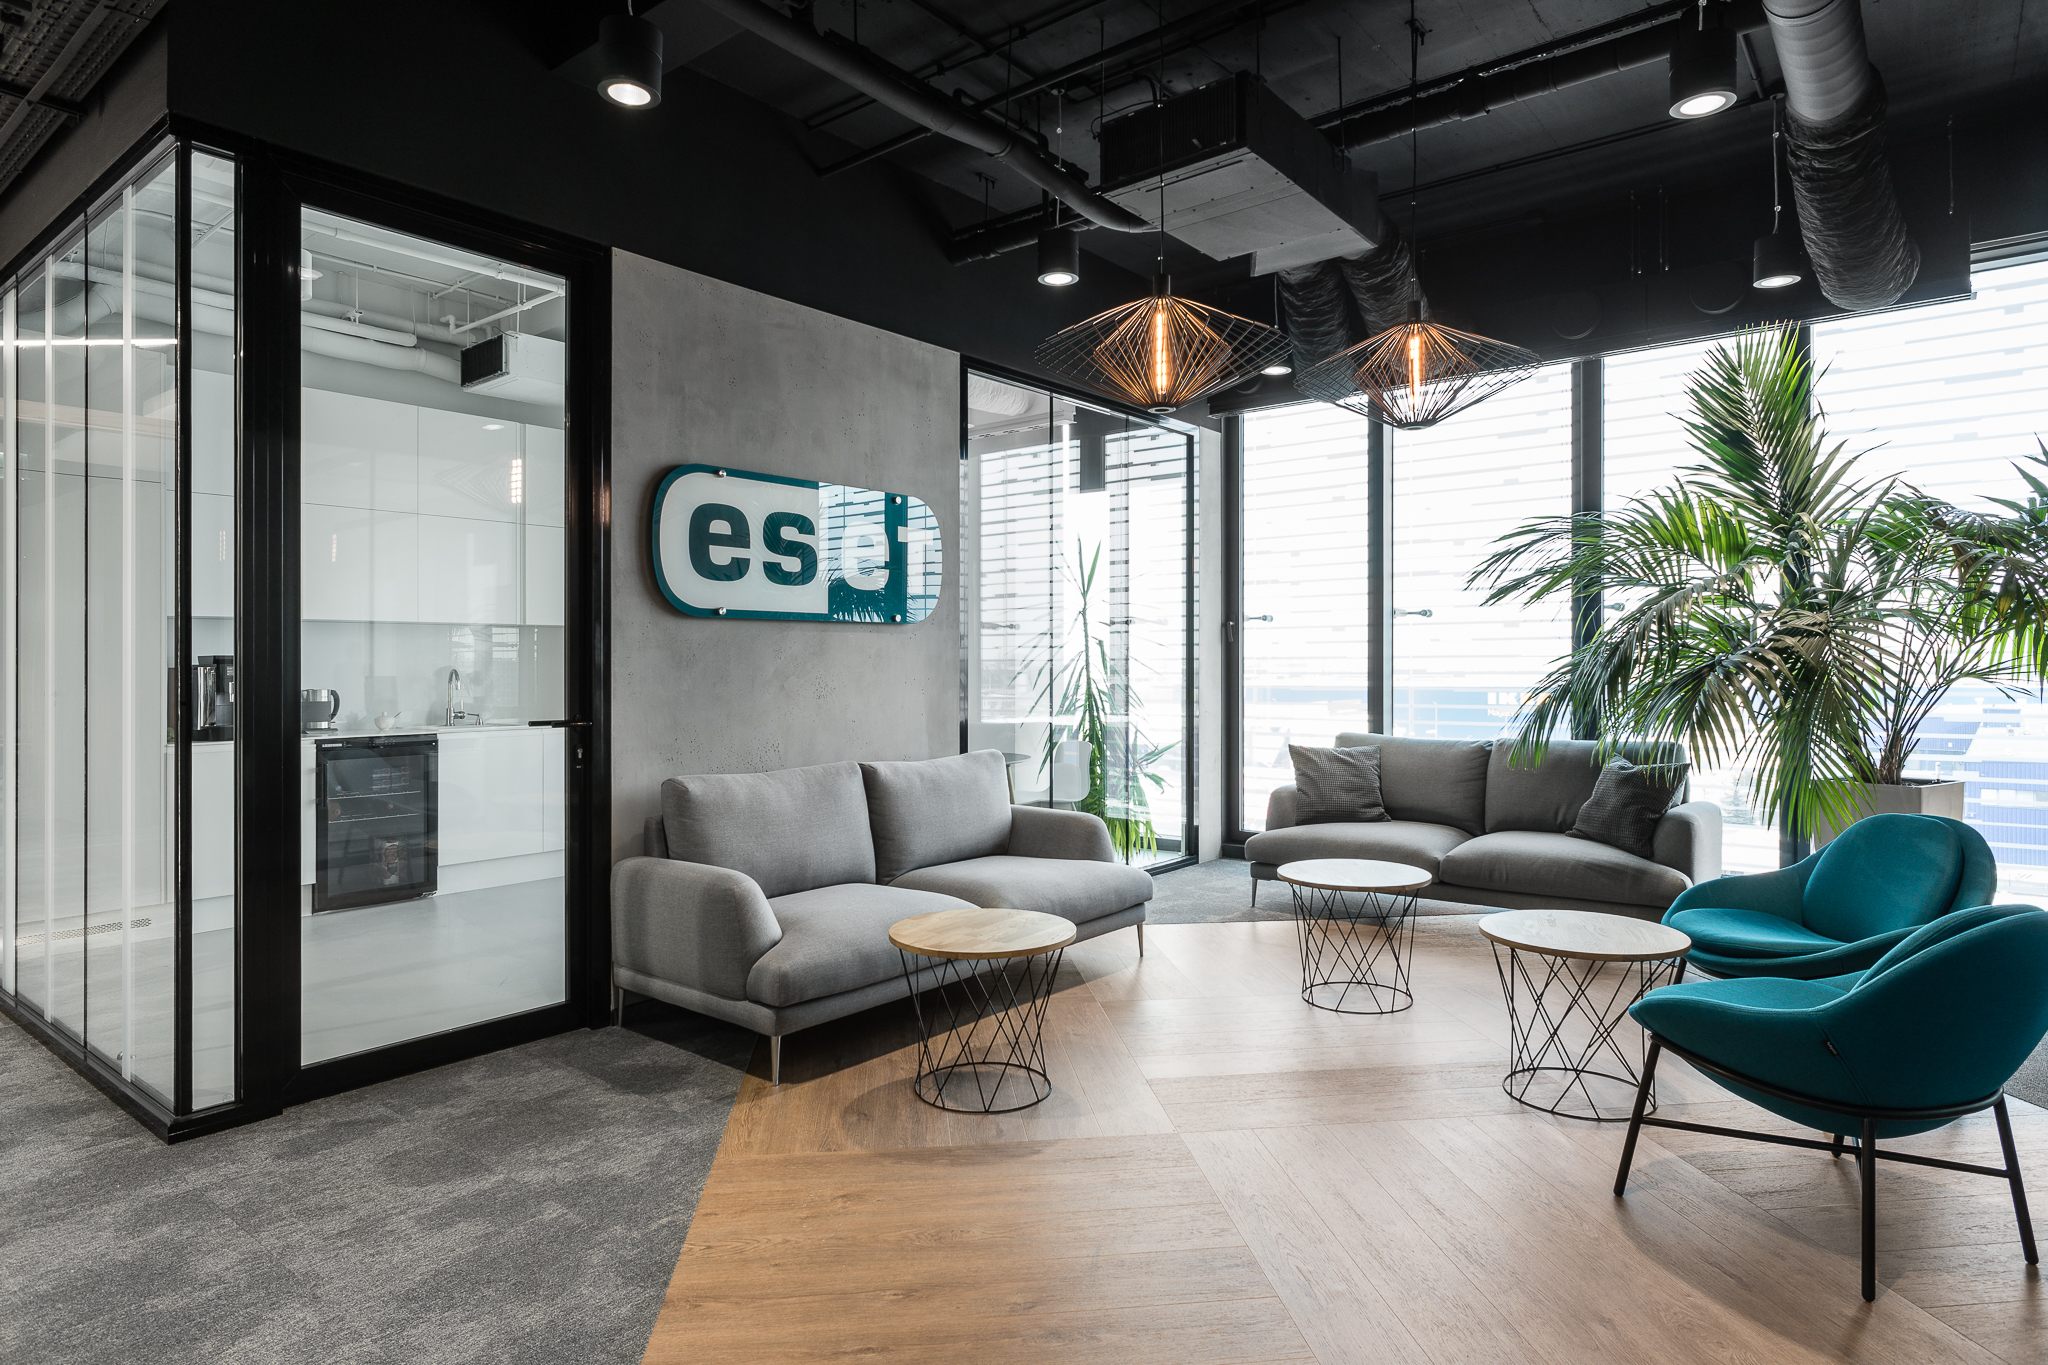 ESET OFFICES BY THE DESIGN GROUP, KRAKÓW – POLAND